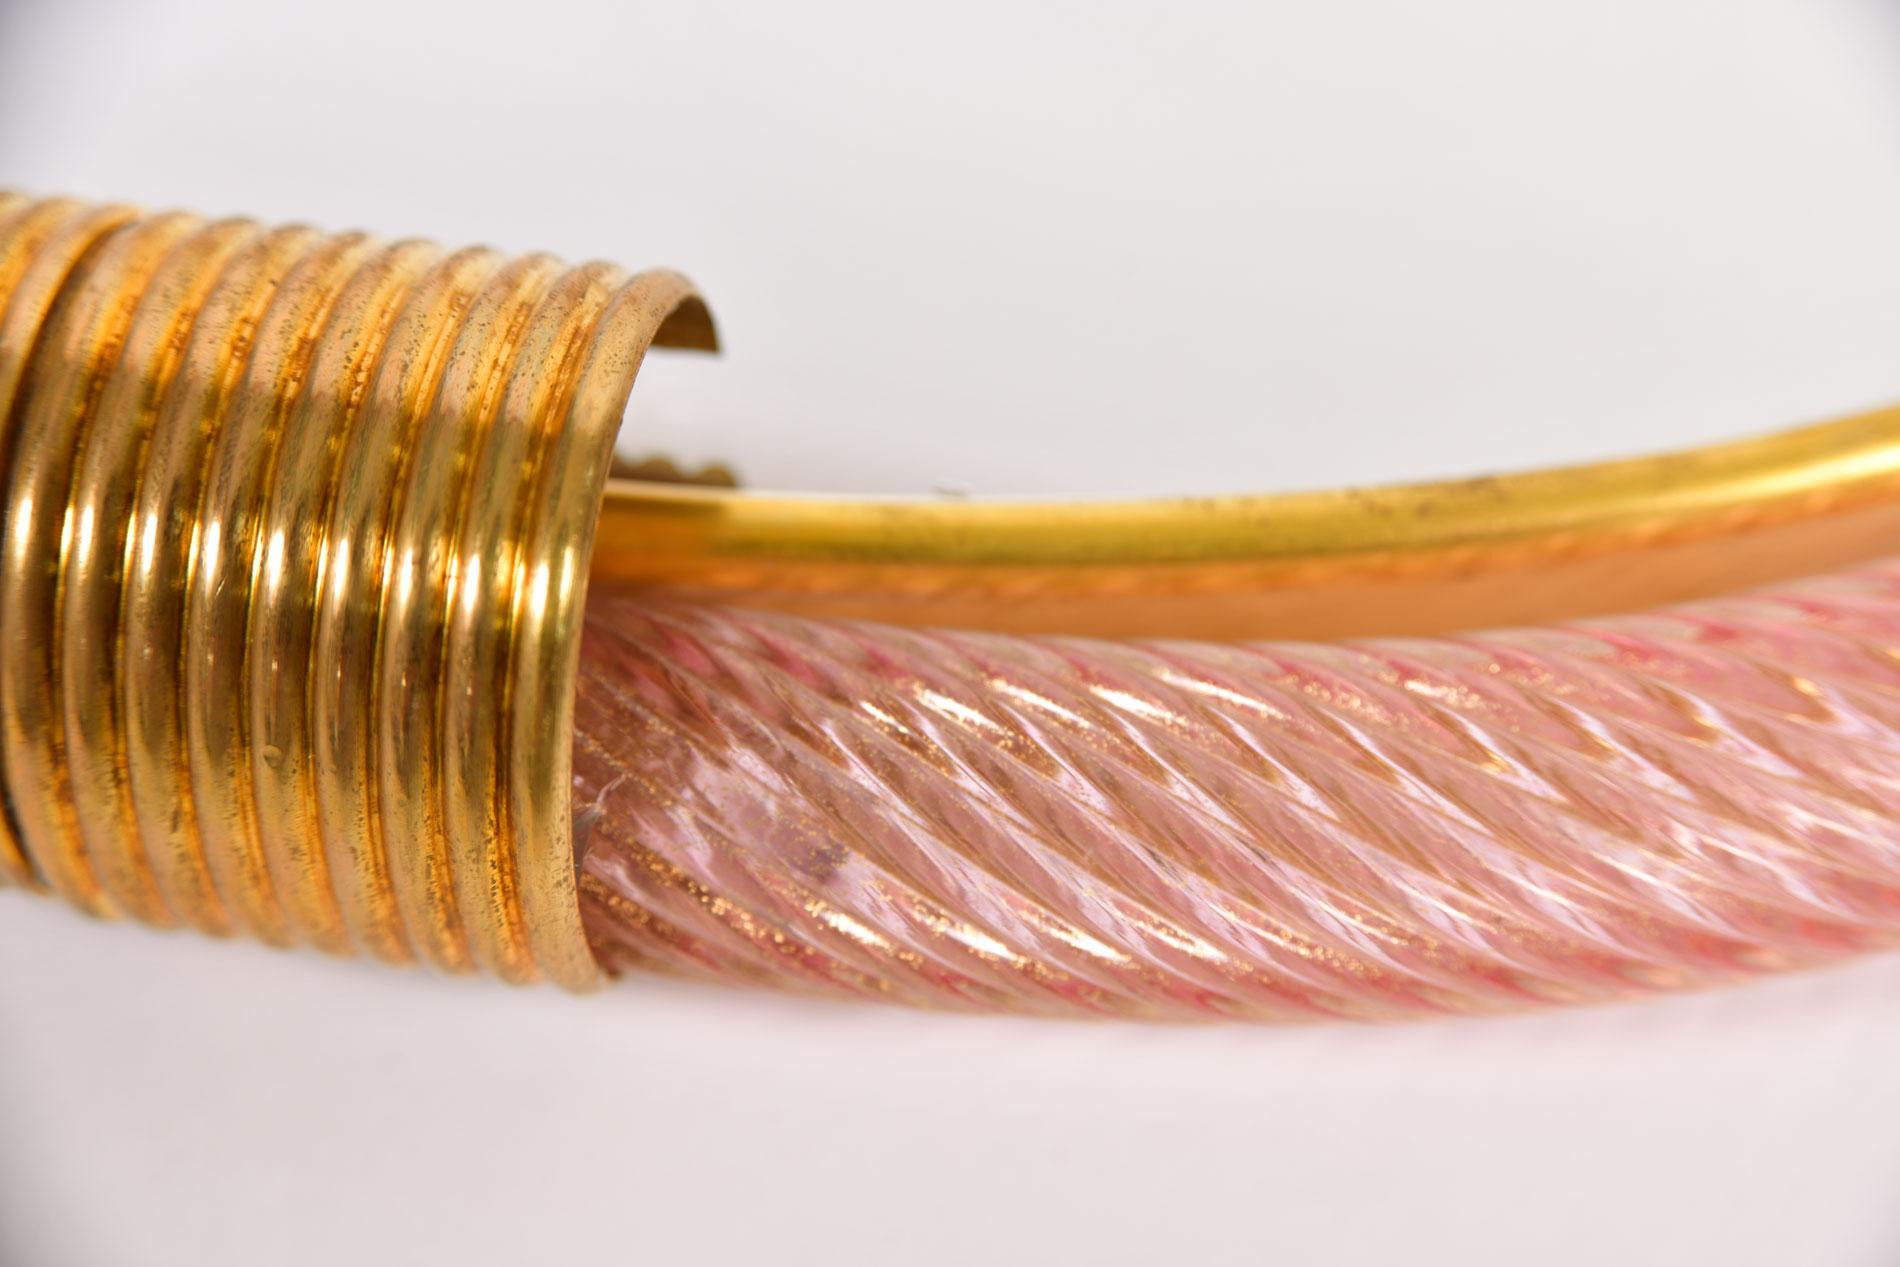 Palest pink ribbed hand blown Murano glass circular mirror with two brass fluted clasps at the top and bottom, the inner edge lined with slender brass filet.

Also available in pale blue.

6 week lead-time if not in stock.